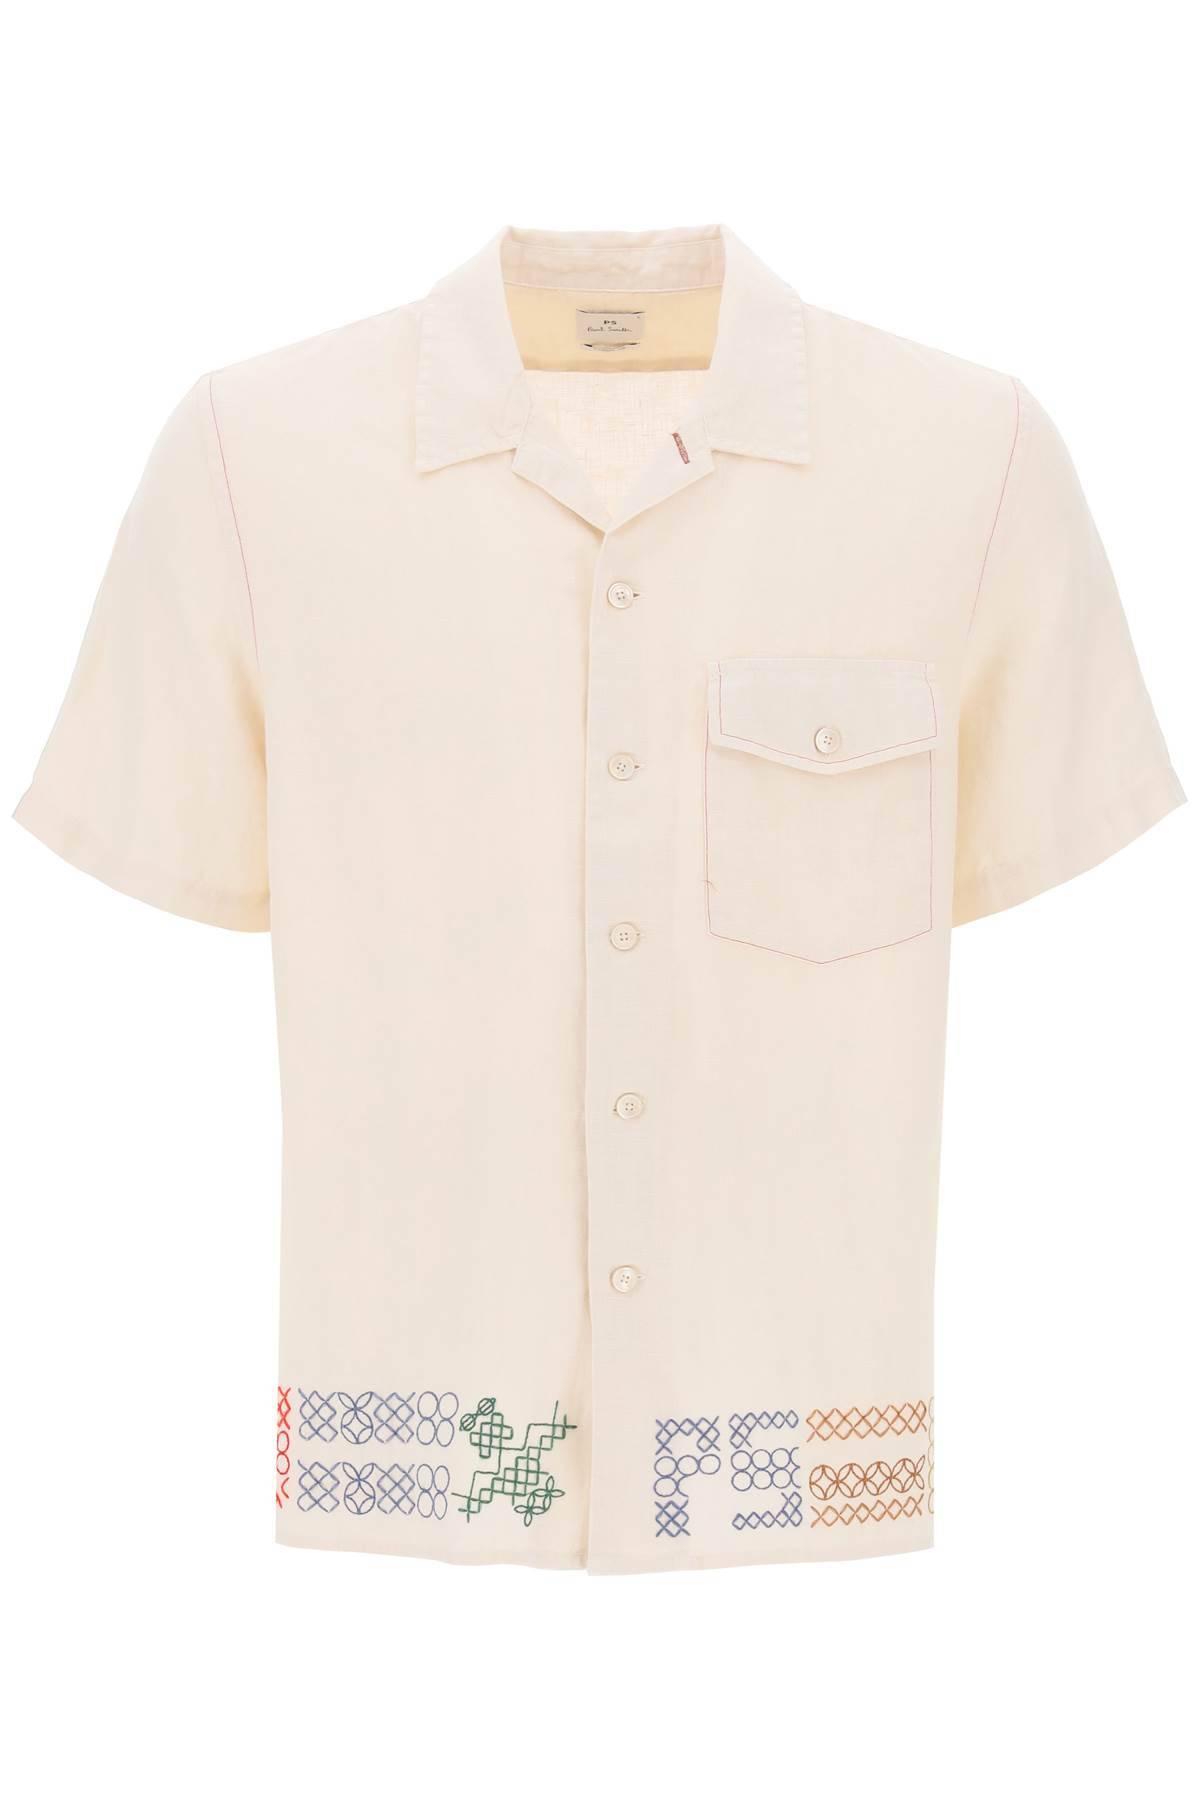 Ps Paul Smith PS PAUL SMITH bowling shirt with cross-stitch embroidery details